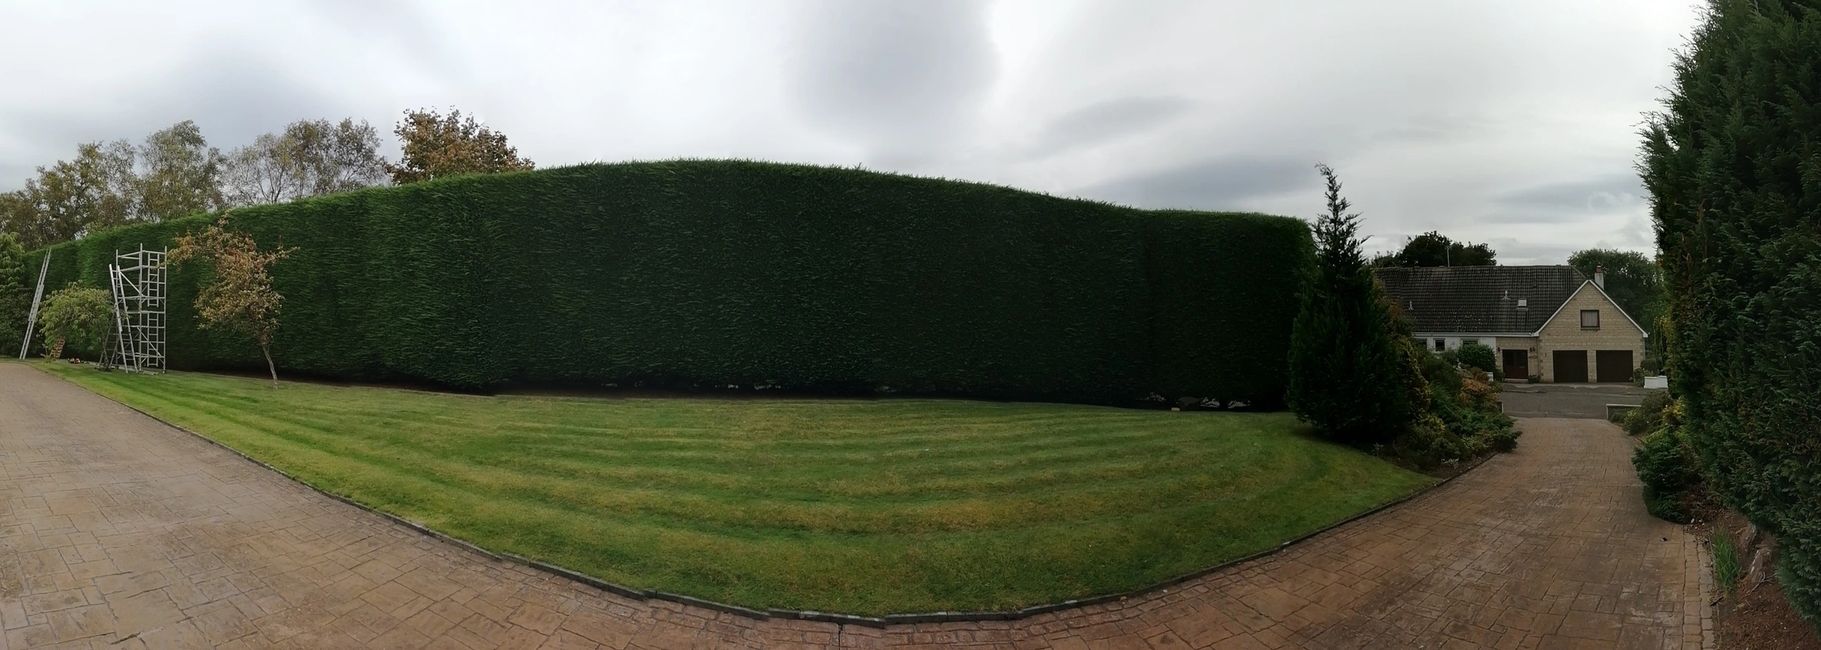 All hedge services - Fine Trimming from large to small.